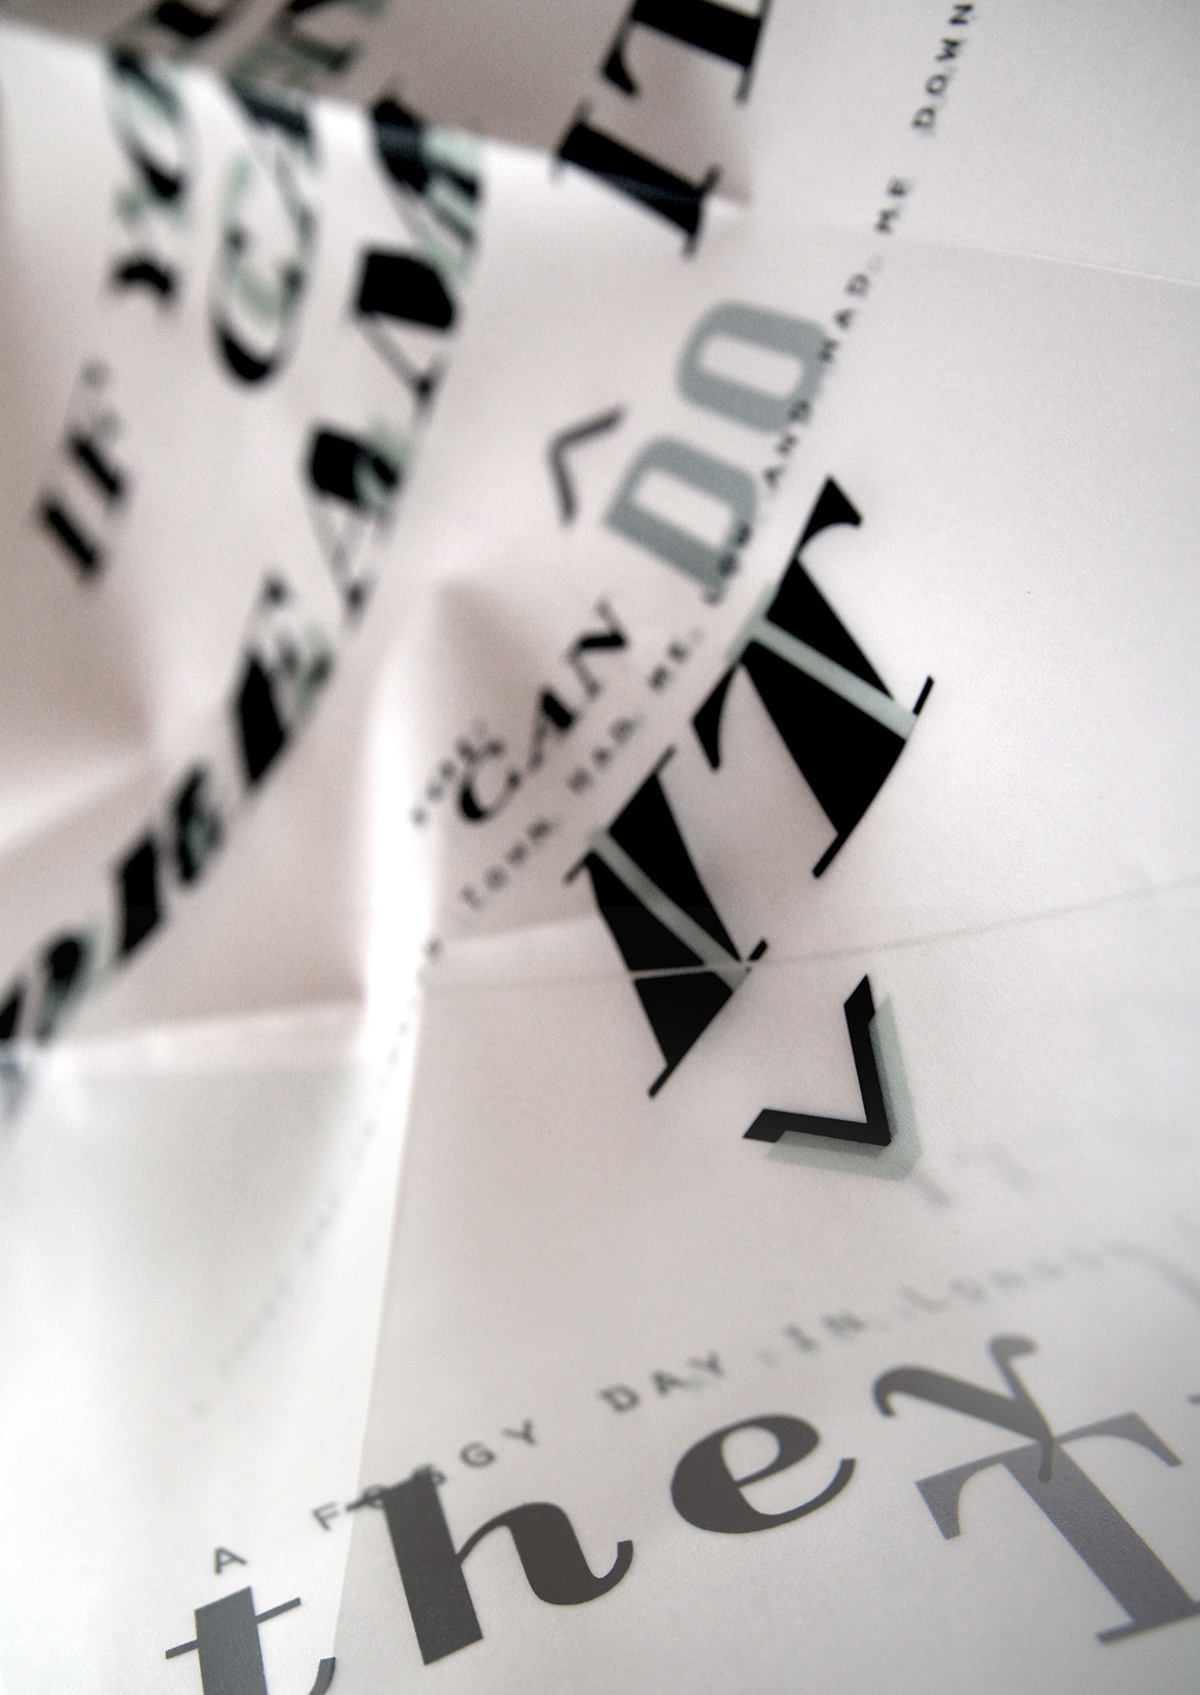 design  typography  london  grids experimental craft  3d  fold  paper